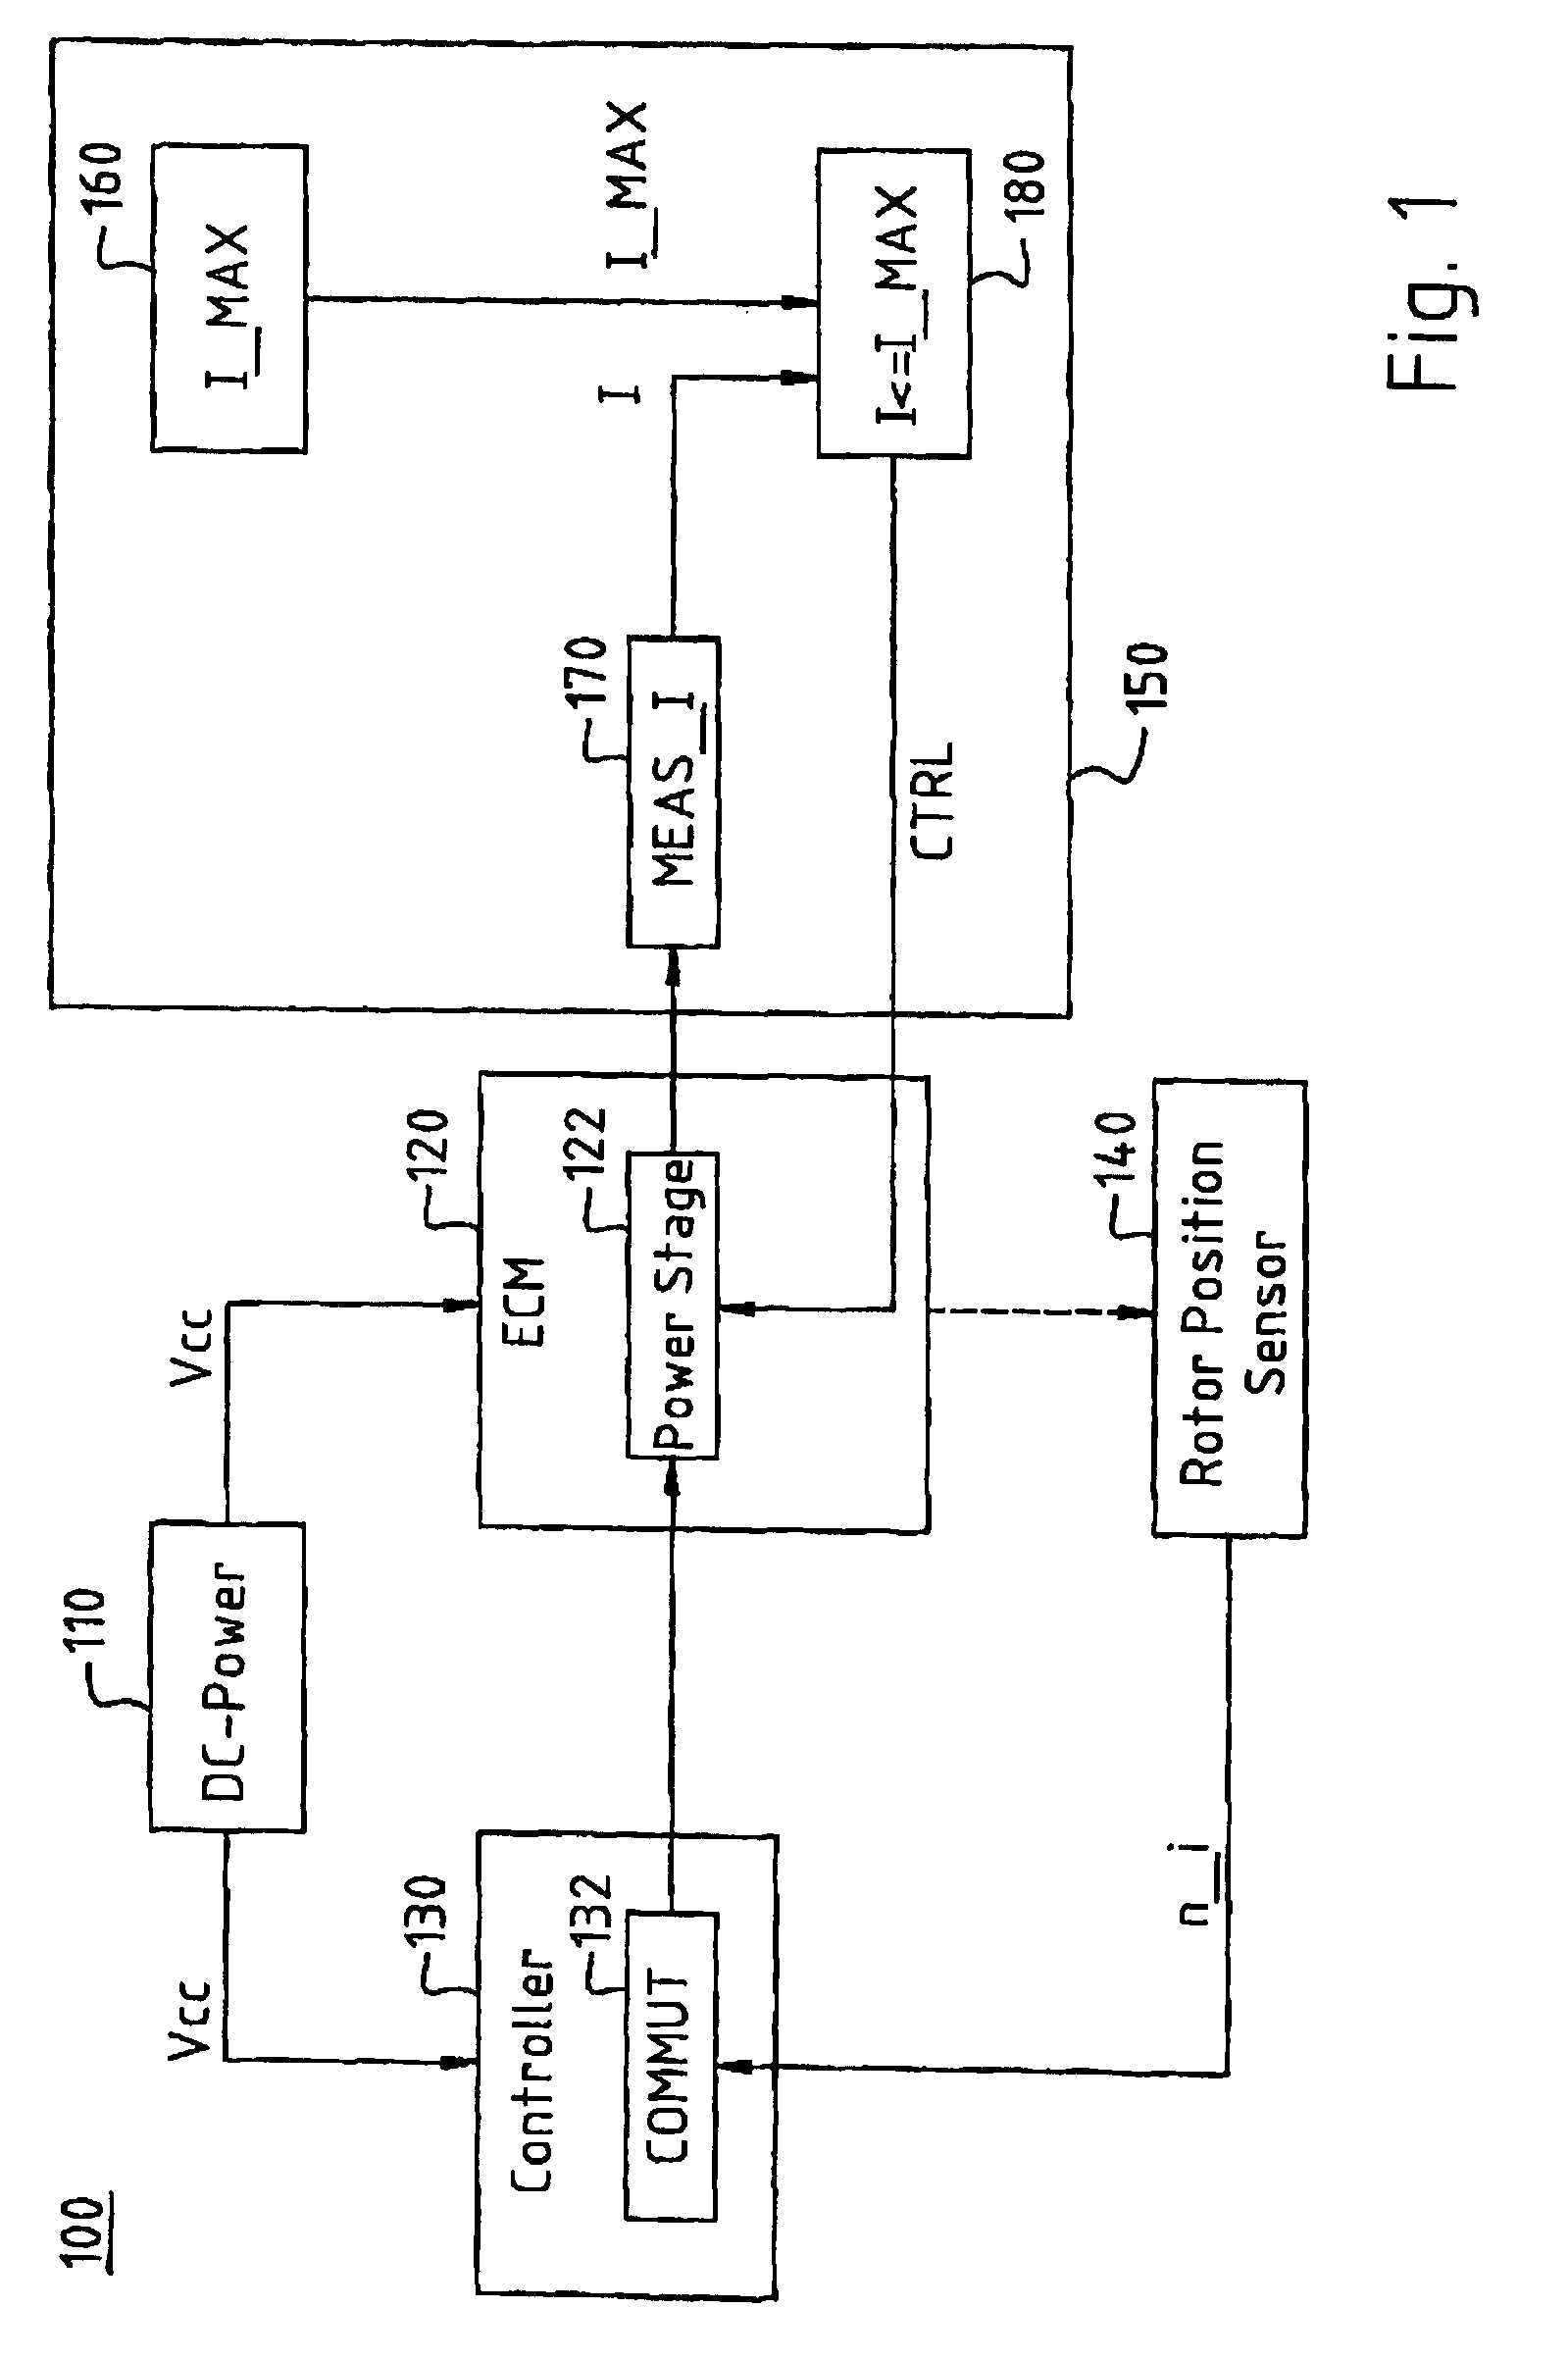 Control circuit for an electronically commutated motor